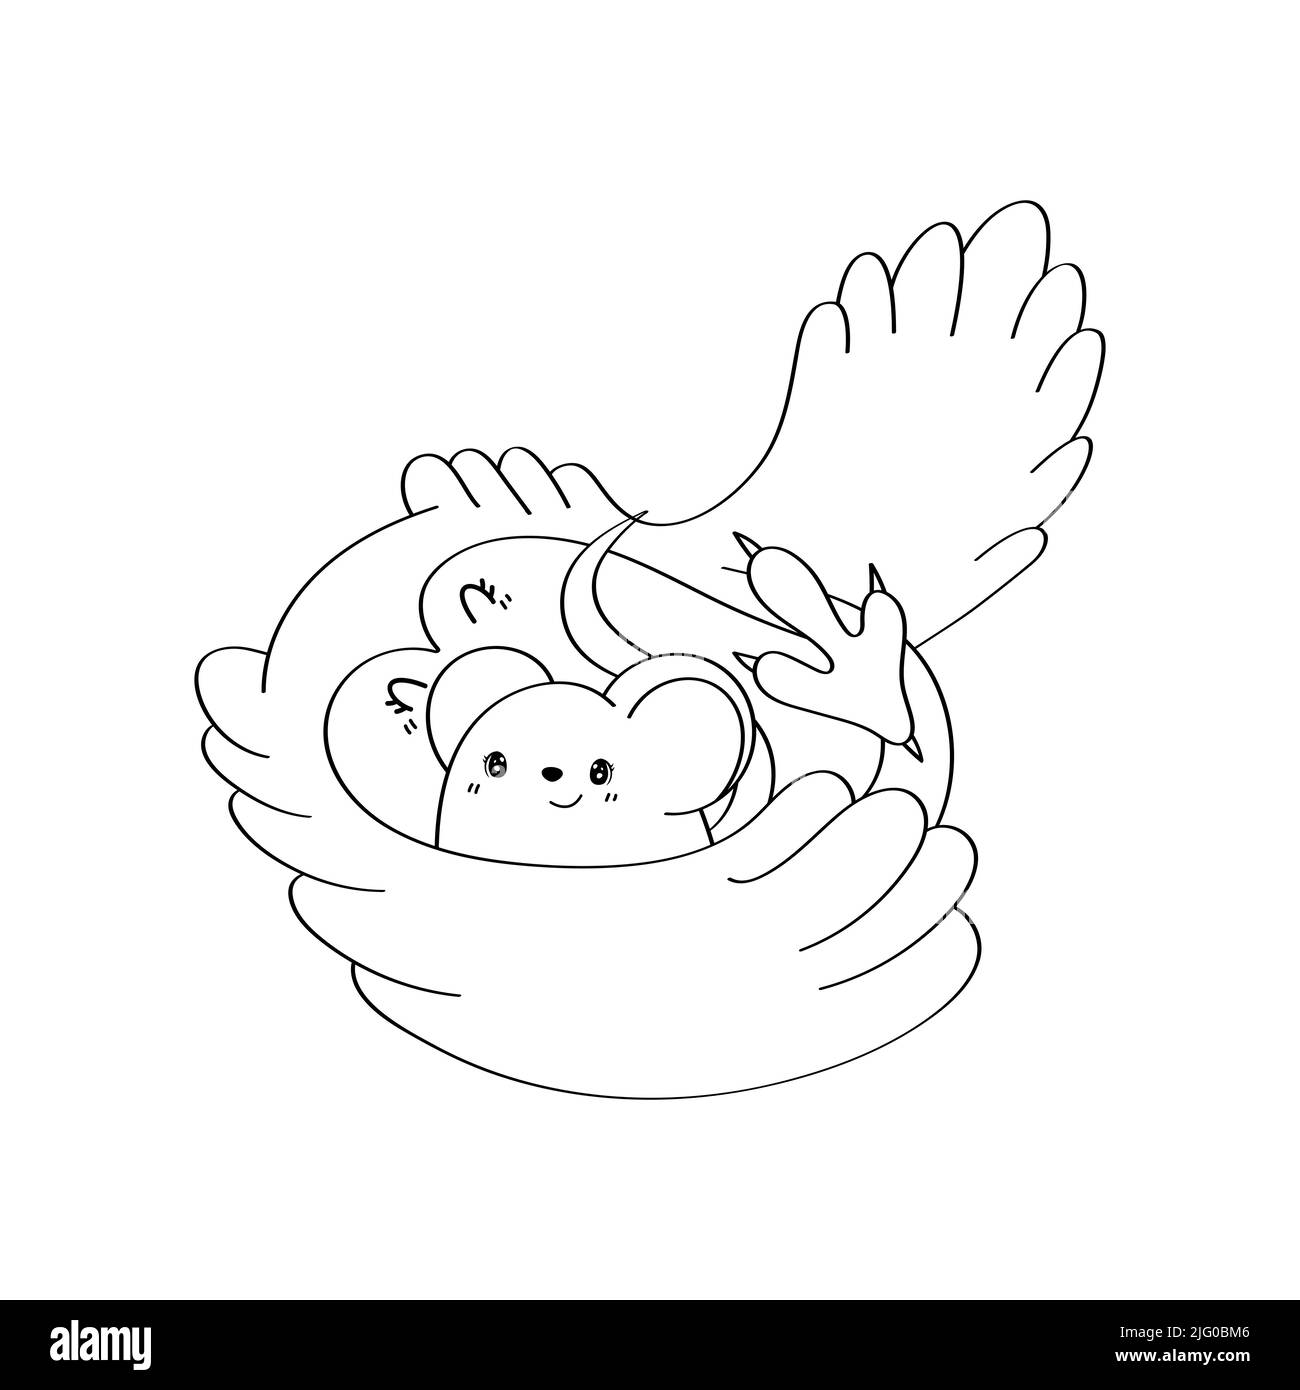 Black and White Owl Clipart in Cute Cartoon Style Beautiful Clip Art Coloring Page Owl with Mouse . Vector Illustration of an Bird for Prints for Stock Vector